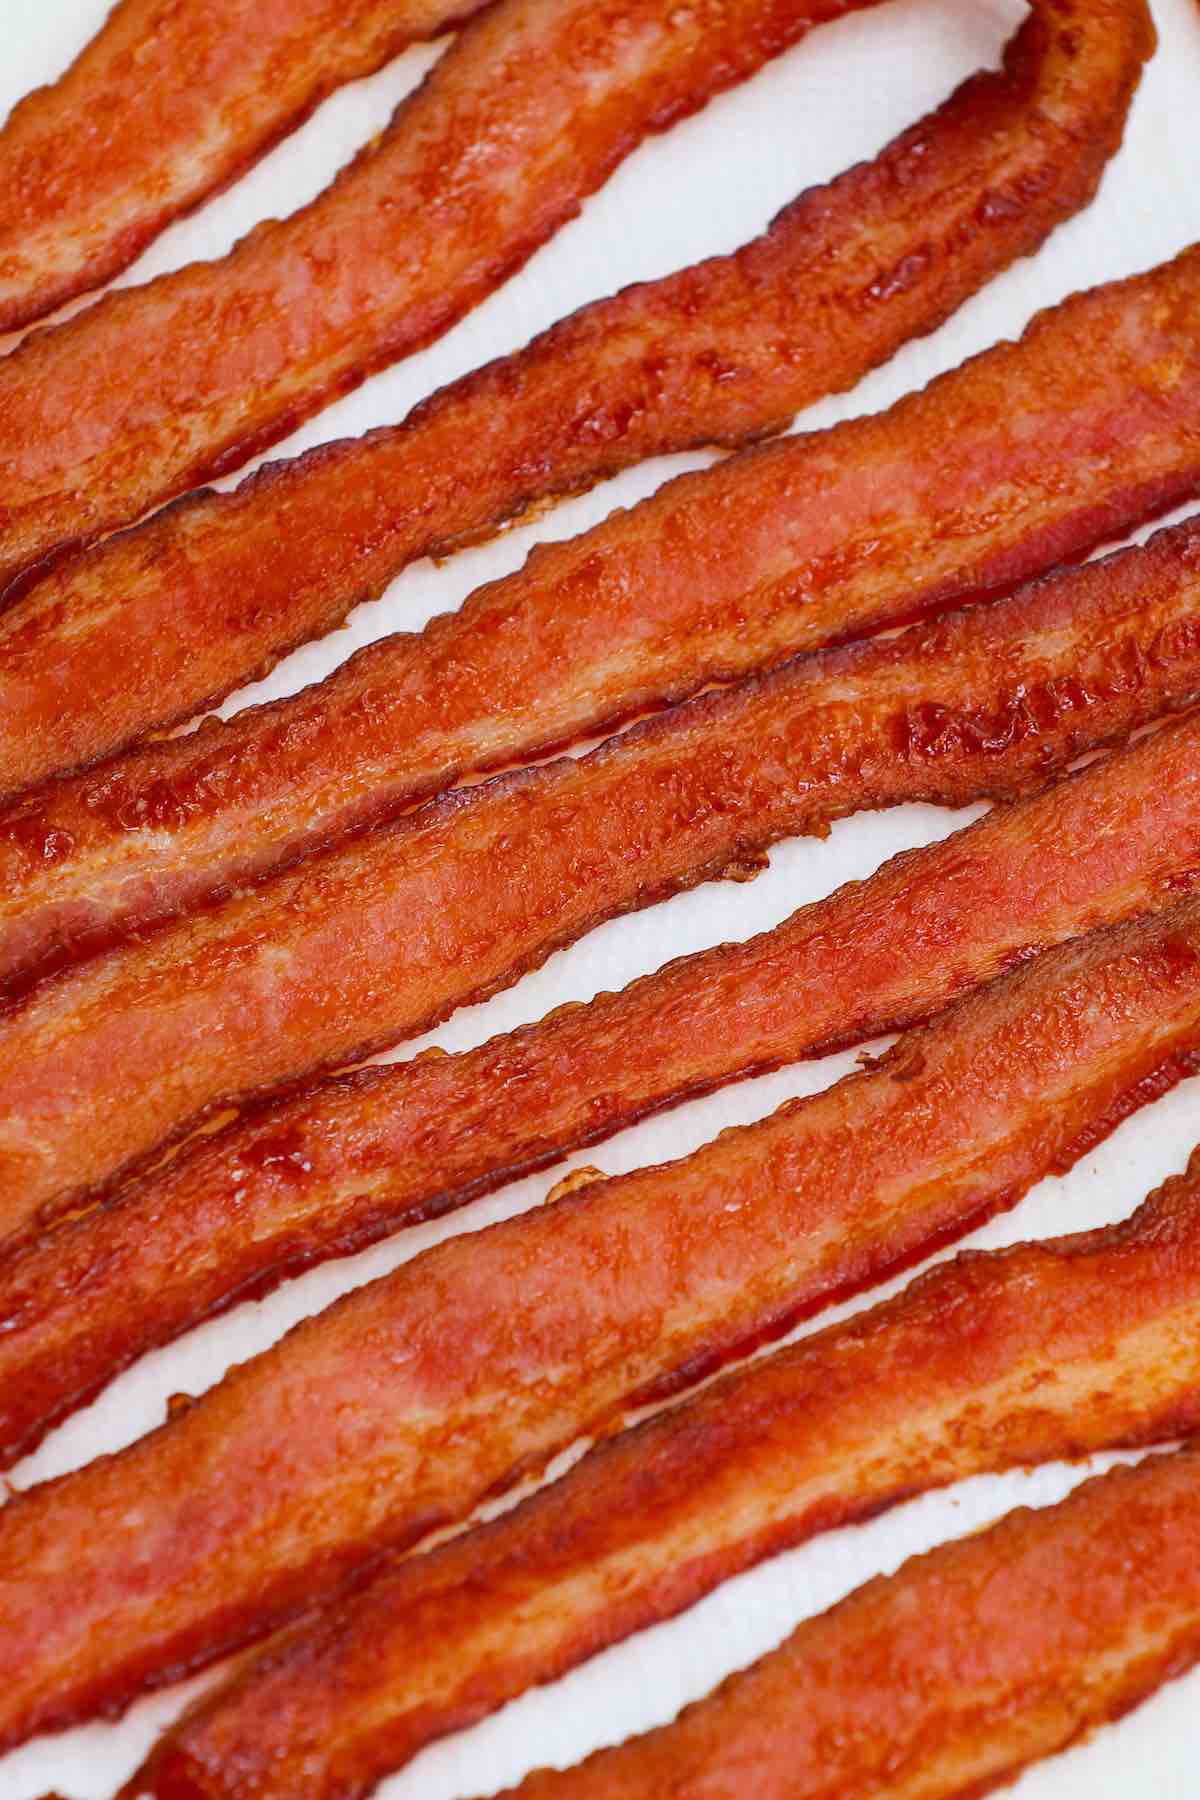 Learn how long to cook bacon in the oven at any temperature including 400, 350 and 375 degrees. Whether you’ve got regular or thick cut, you can make crispy bacon easily by using a parchment-lined pan with or without a rack. It’s a great way to feed a crowd!